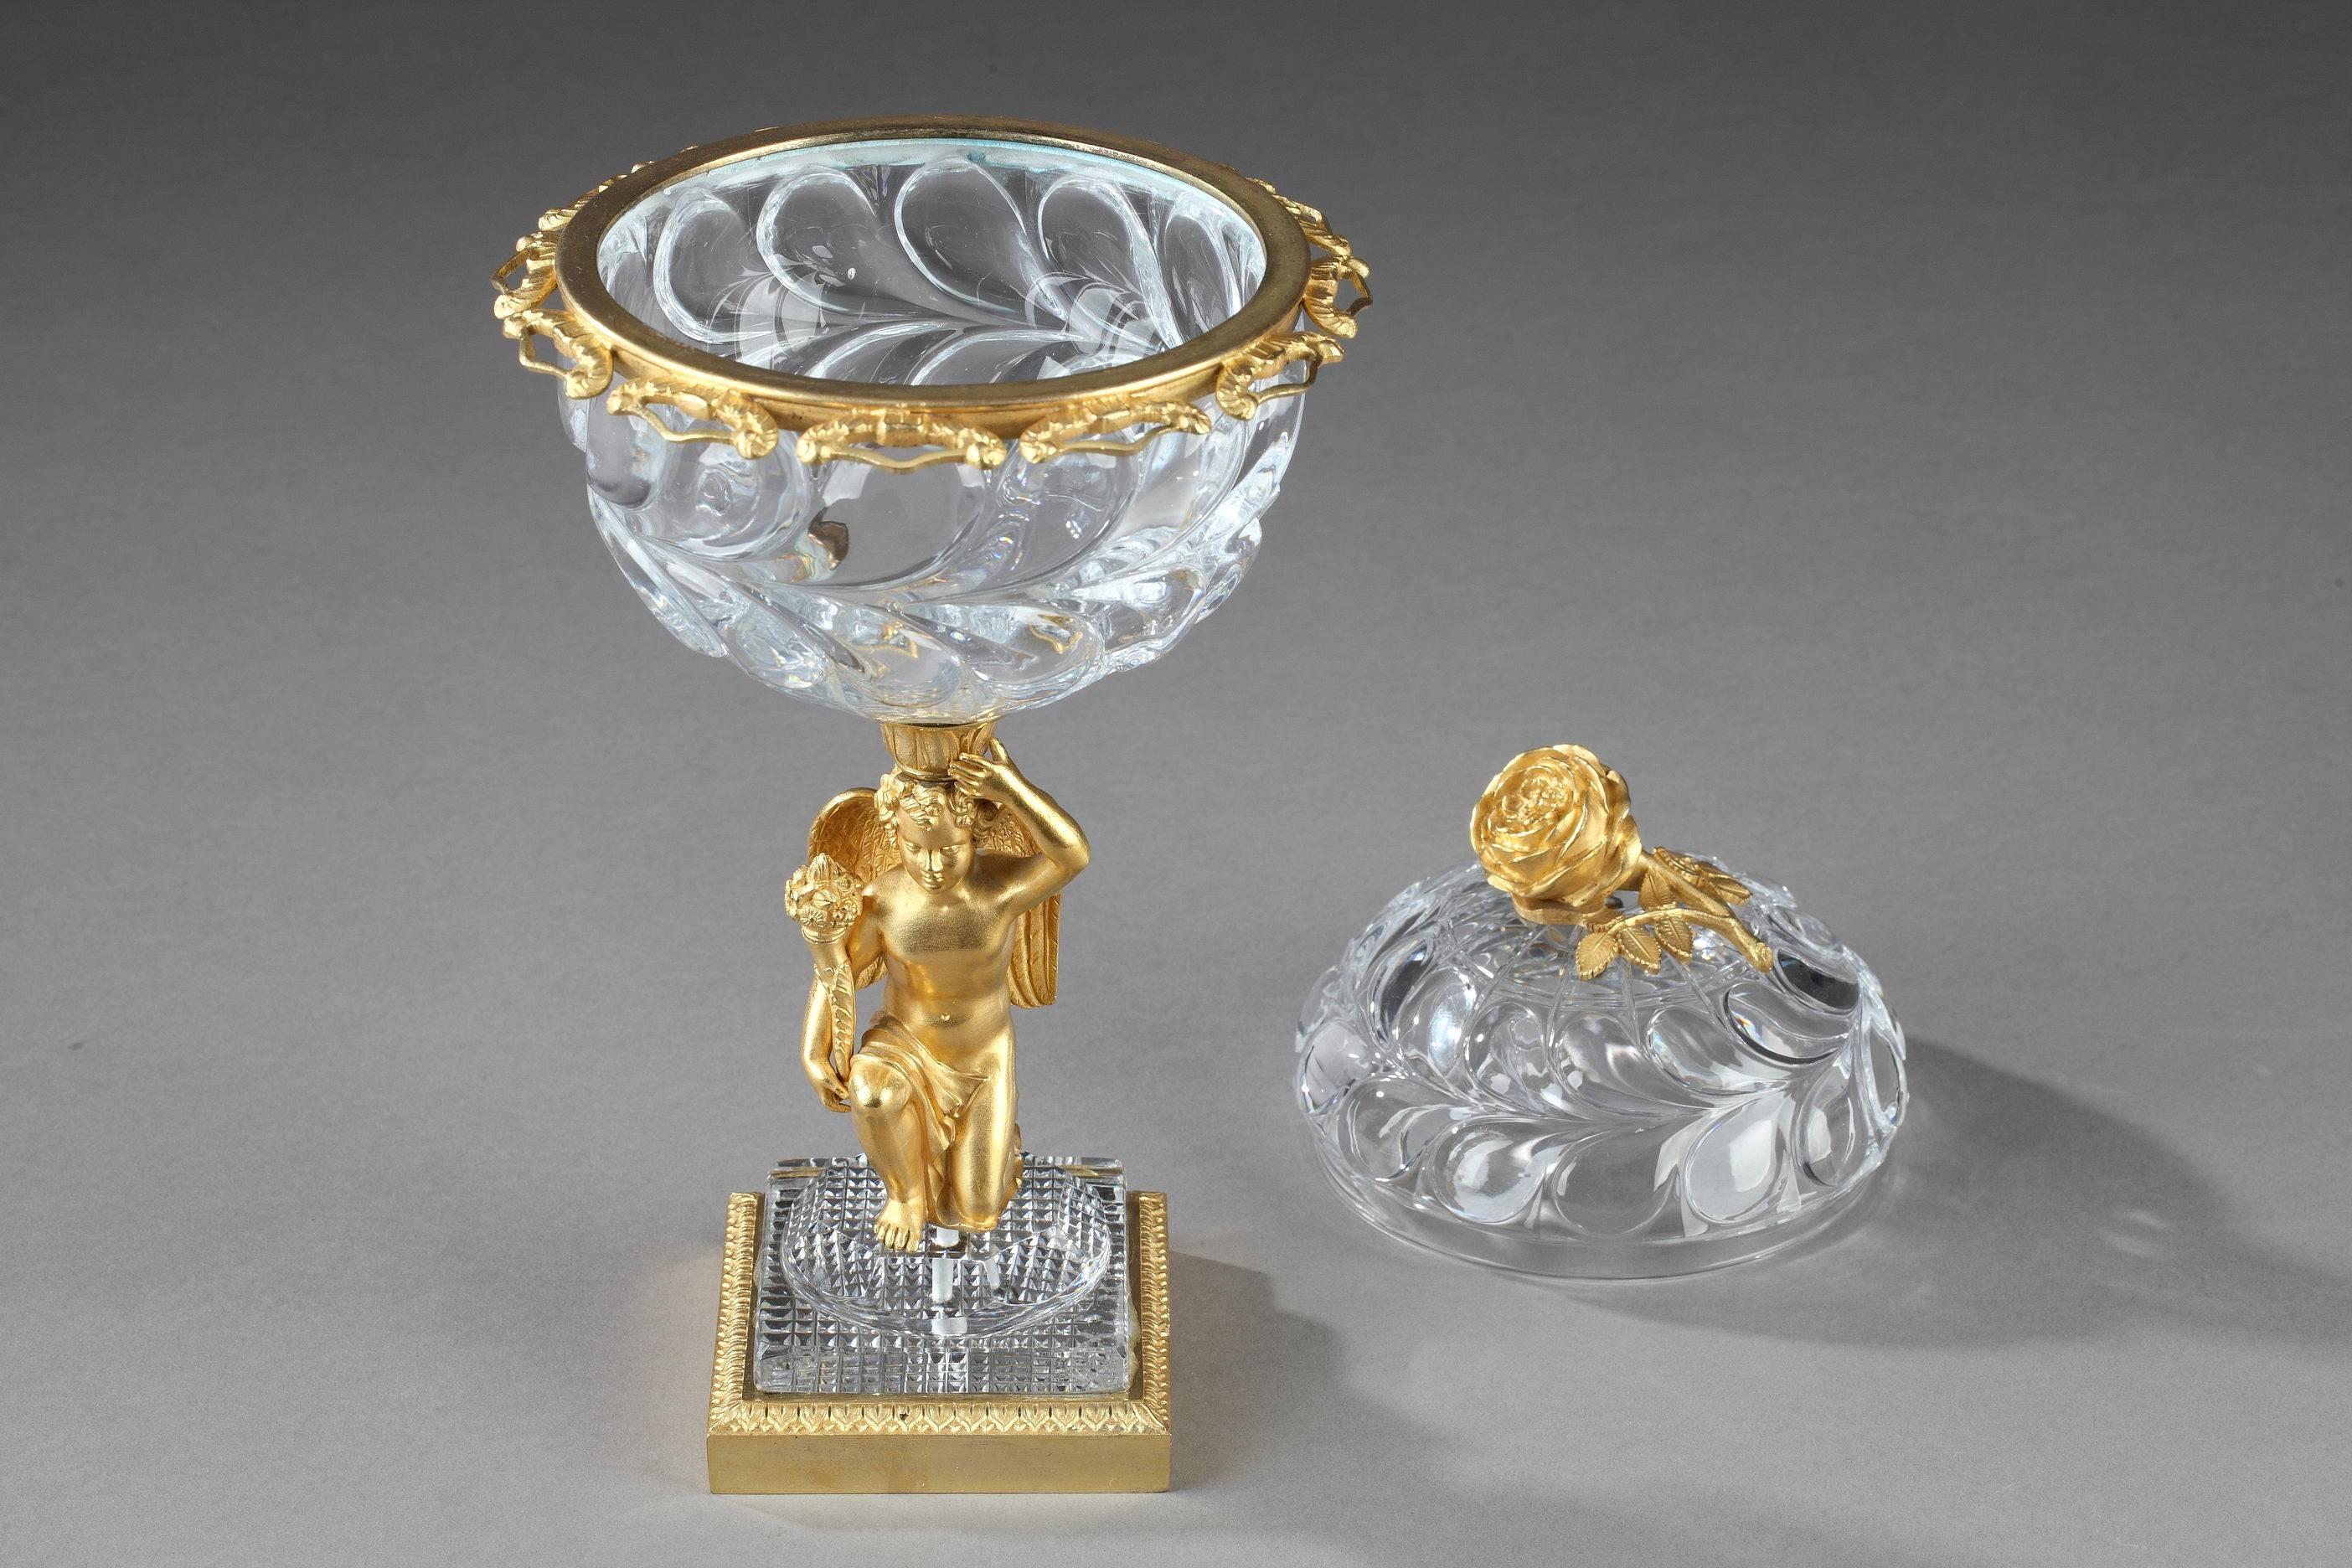 Jam pot in molded crystal from Montcenis Le Creusot. It is set on a gilt bronze figure of a kneeling cupid who is holding a cornucopia in his right hand. The terraced, square base is intricately sculpted with water leaves. A gilt bronze band